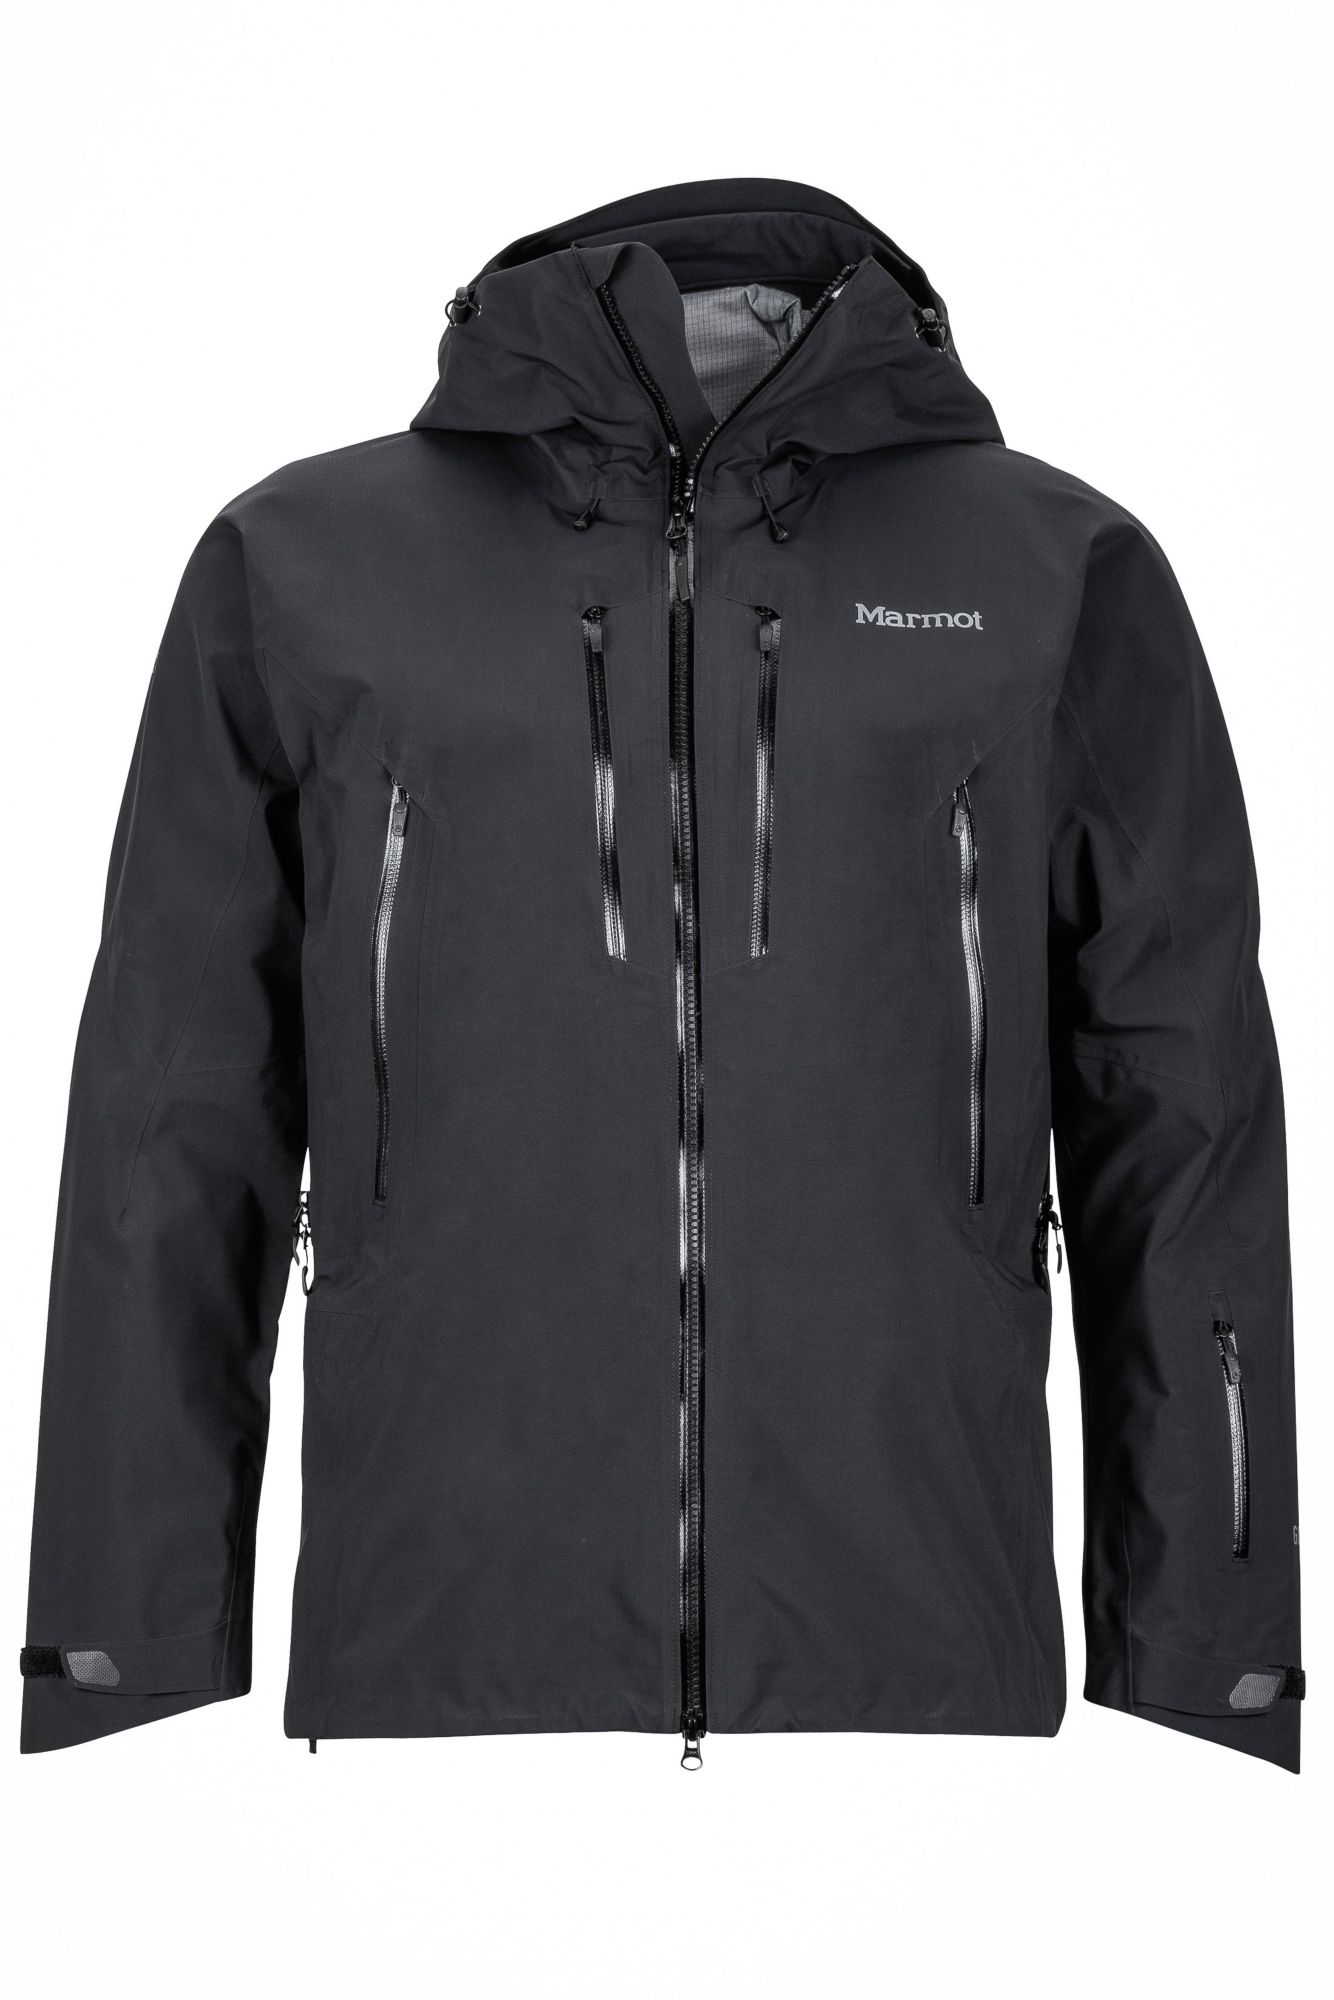 Marmot Outdoor Clothing Gear For Hiking Travel Snowsports